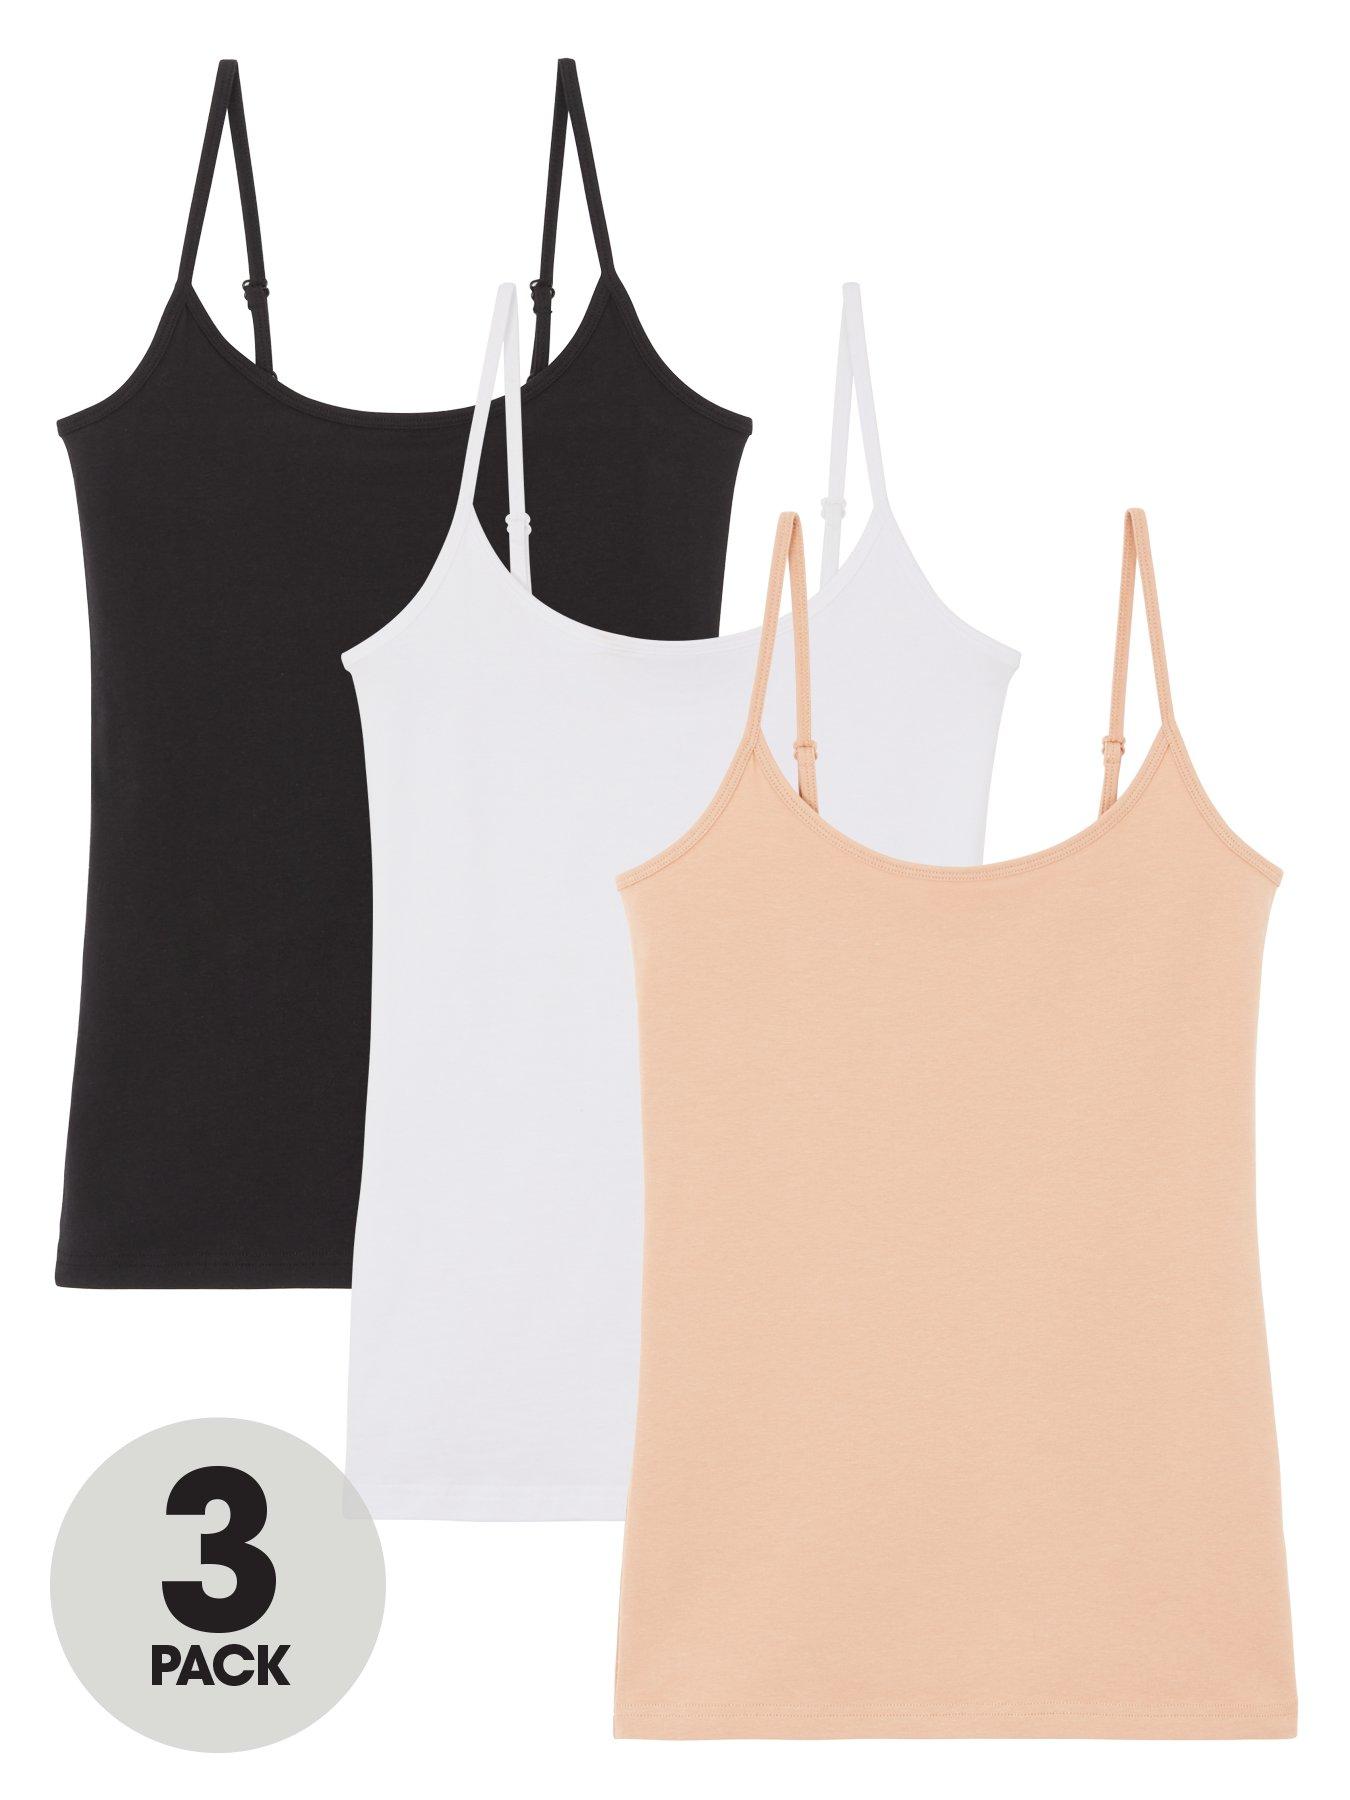 Everyday The Essential 3 Pack Cami Top - Black, White, Nude